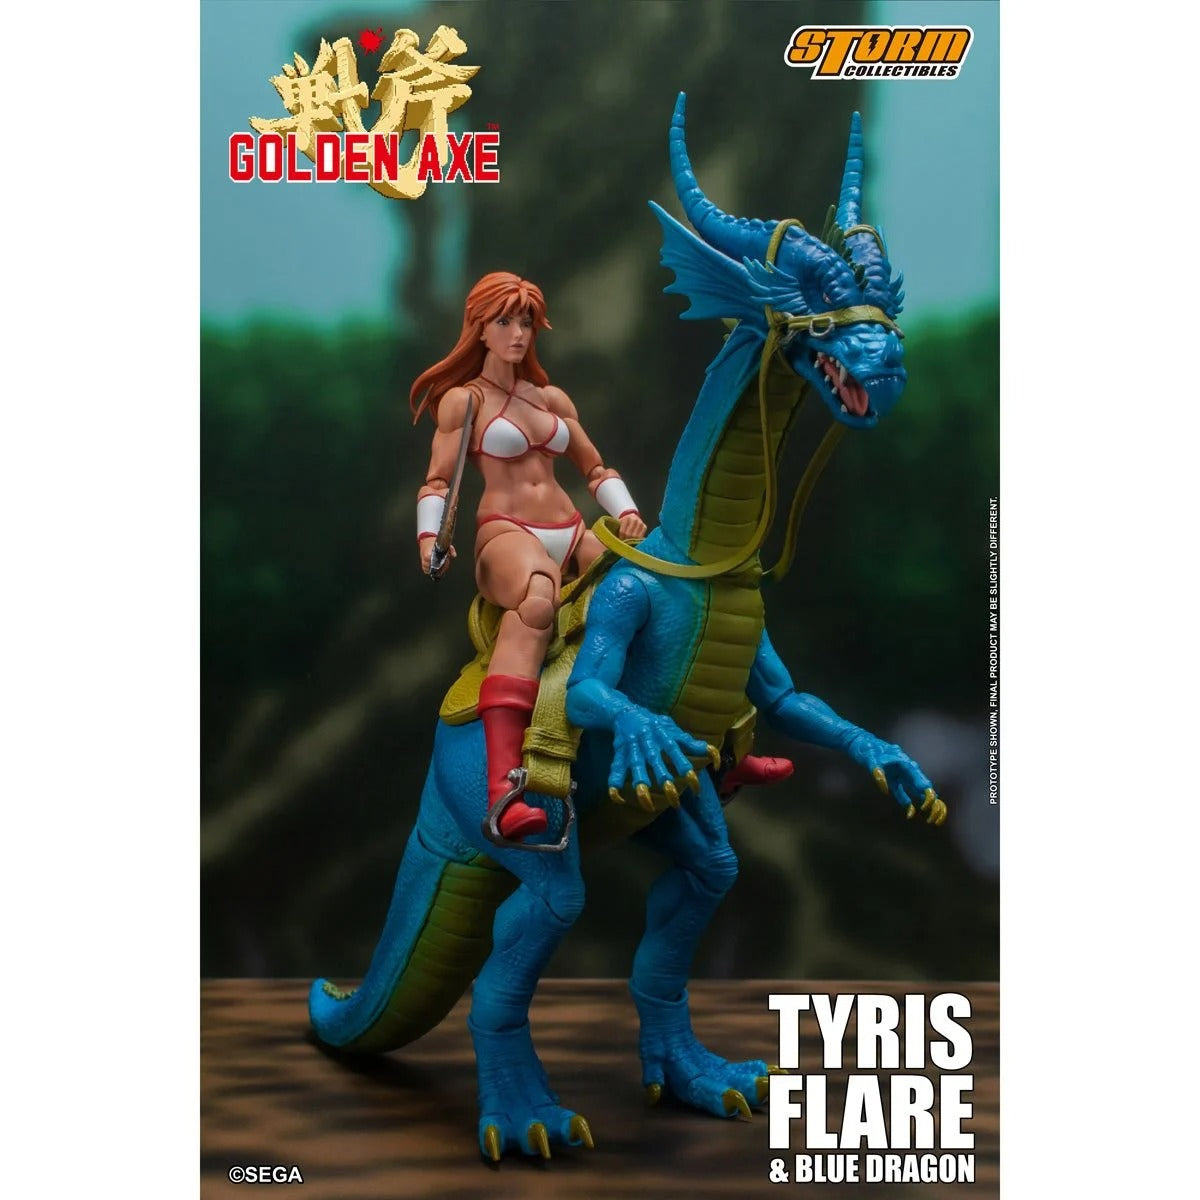 Golden Axe Tyris Flare and Blue Dragon 1:12 Scale Figure